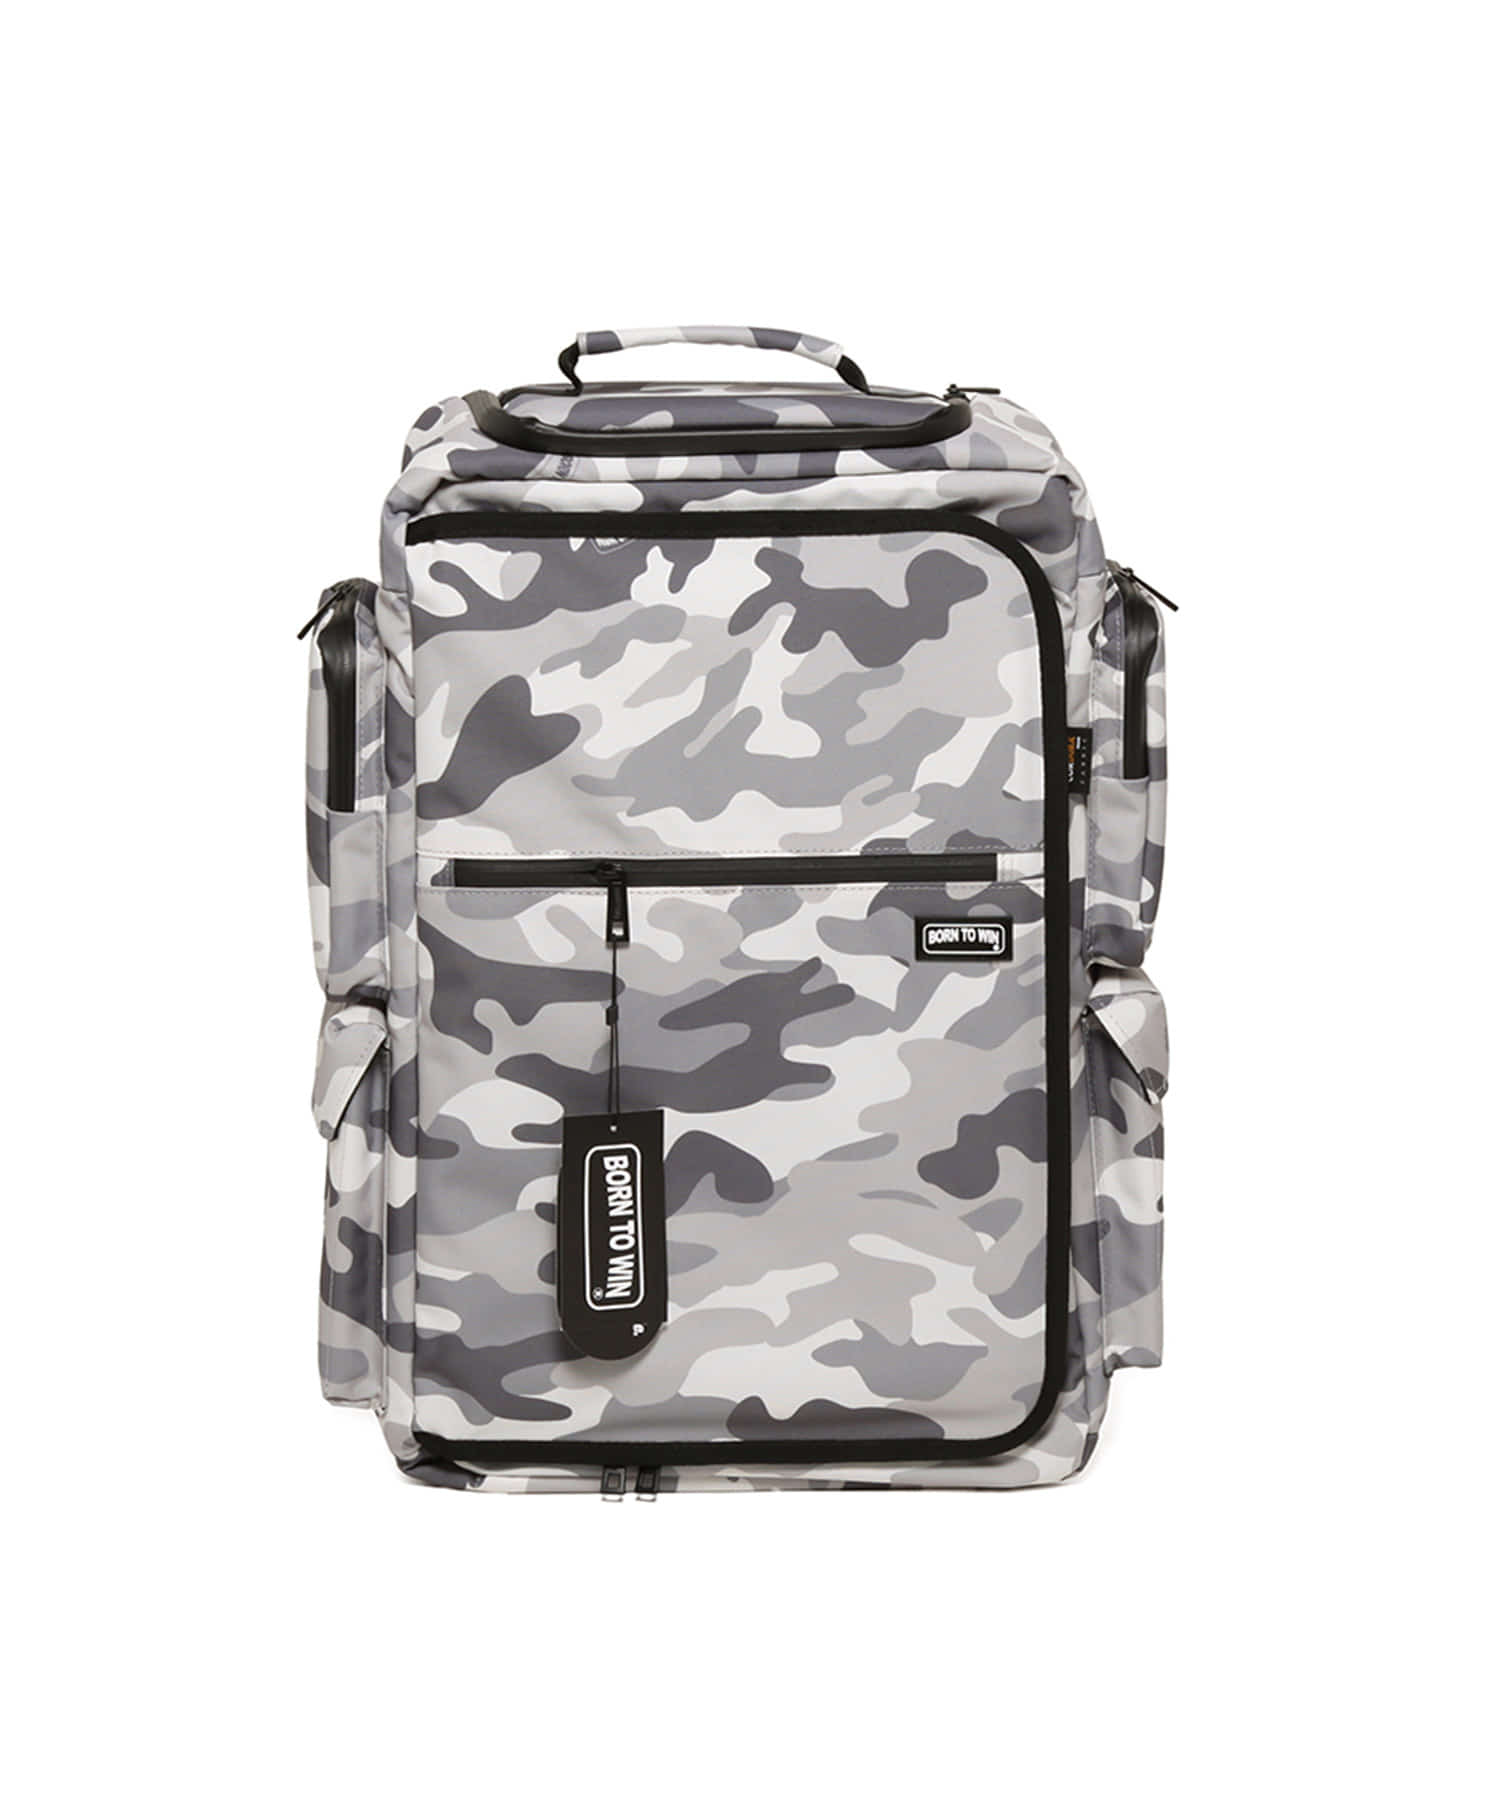 B2 BACKPACK NO PATCH VER [GREY CAMO]